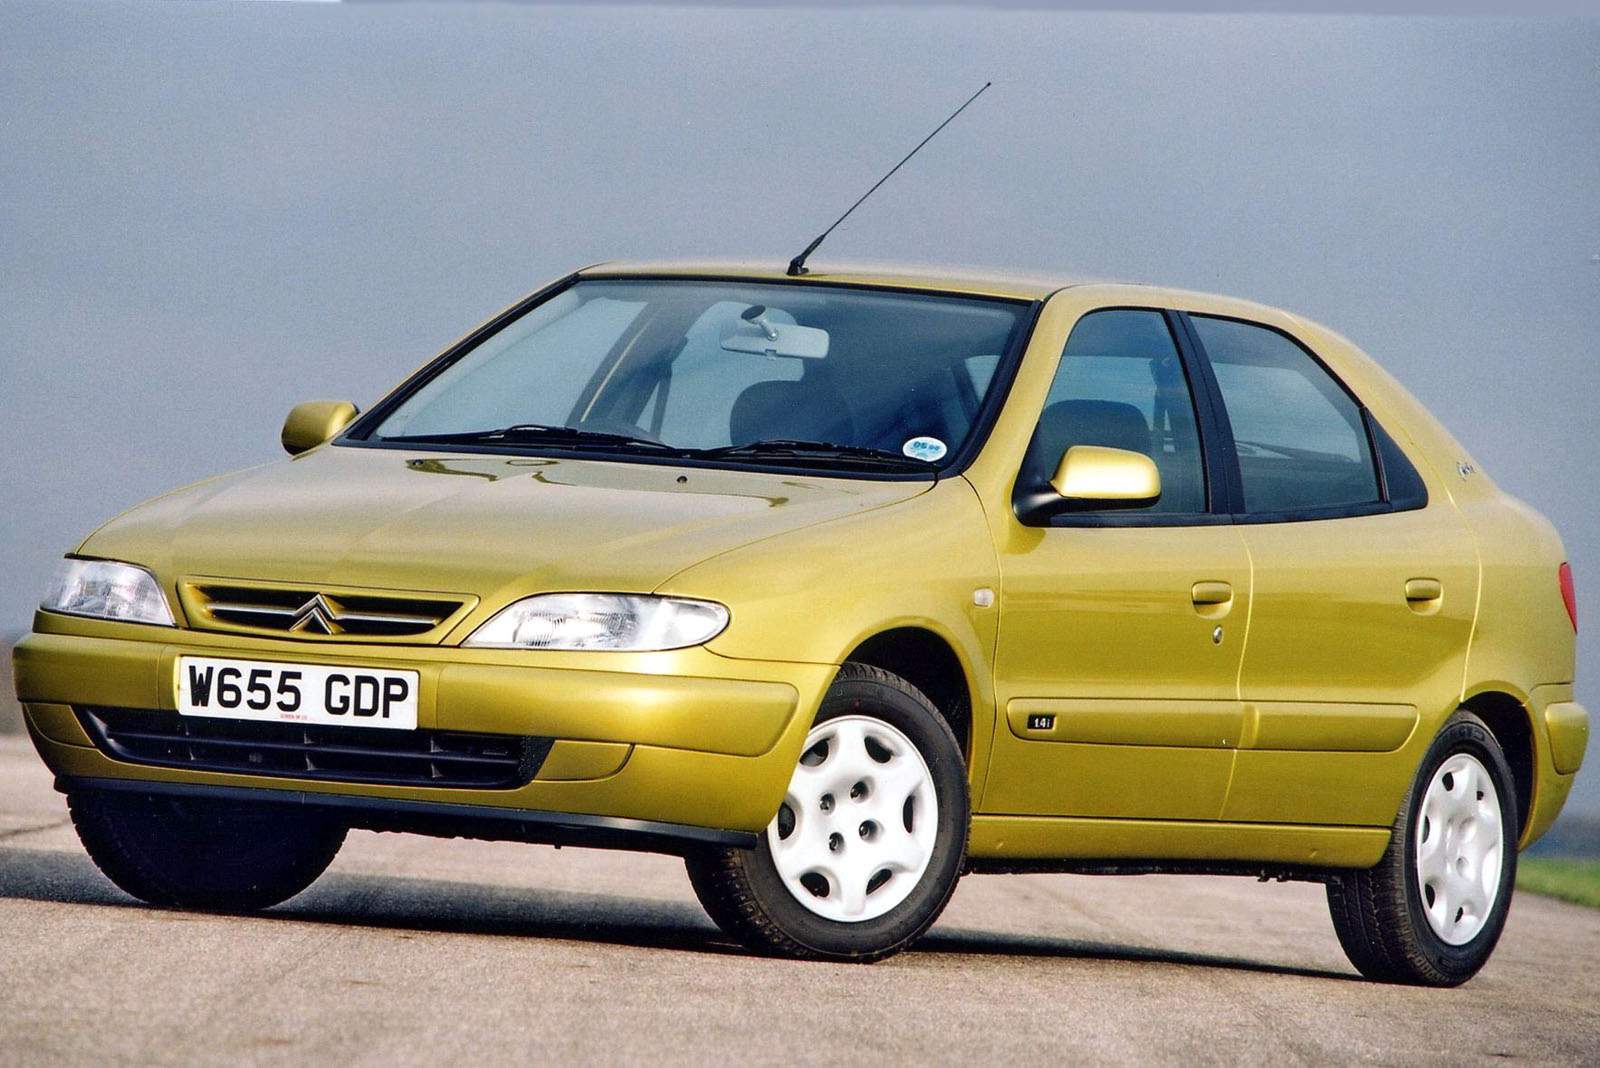 'Sensible' is the word that most readily springs to mind when considering Citroen's Xsara. Under the skin, there's nothing much to differentiate this family 